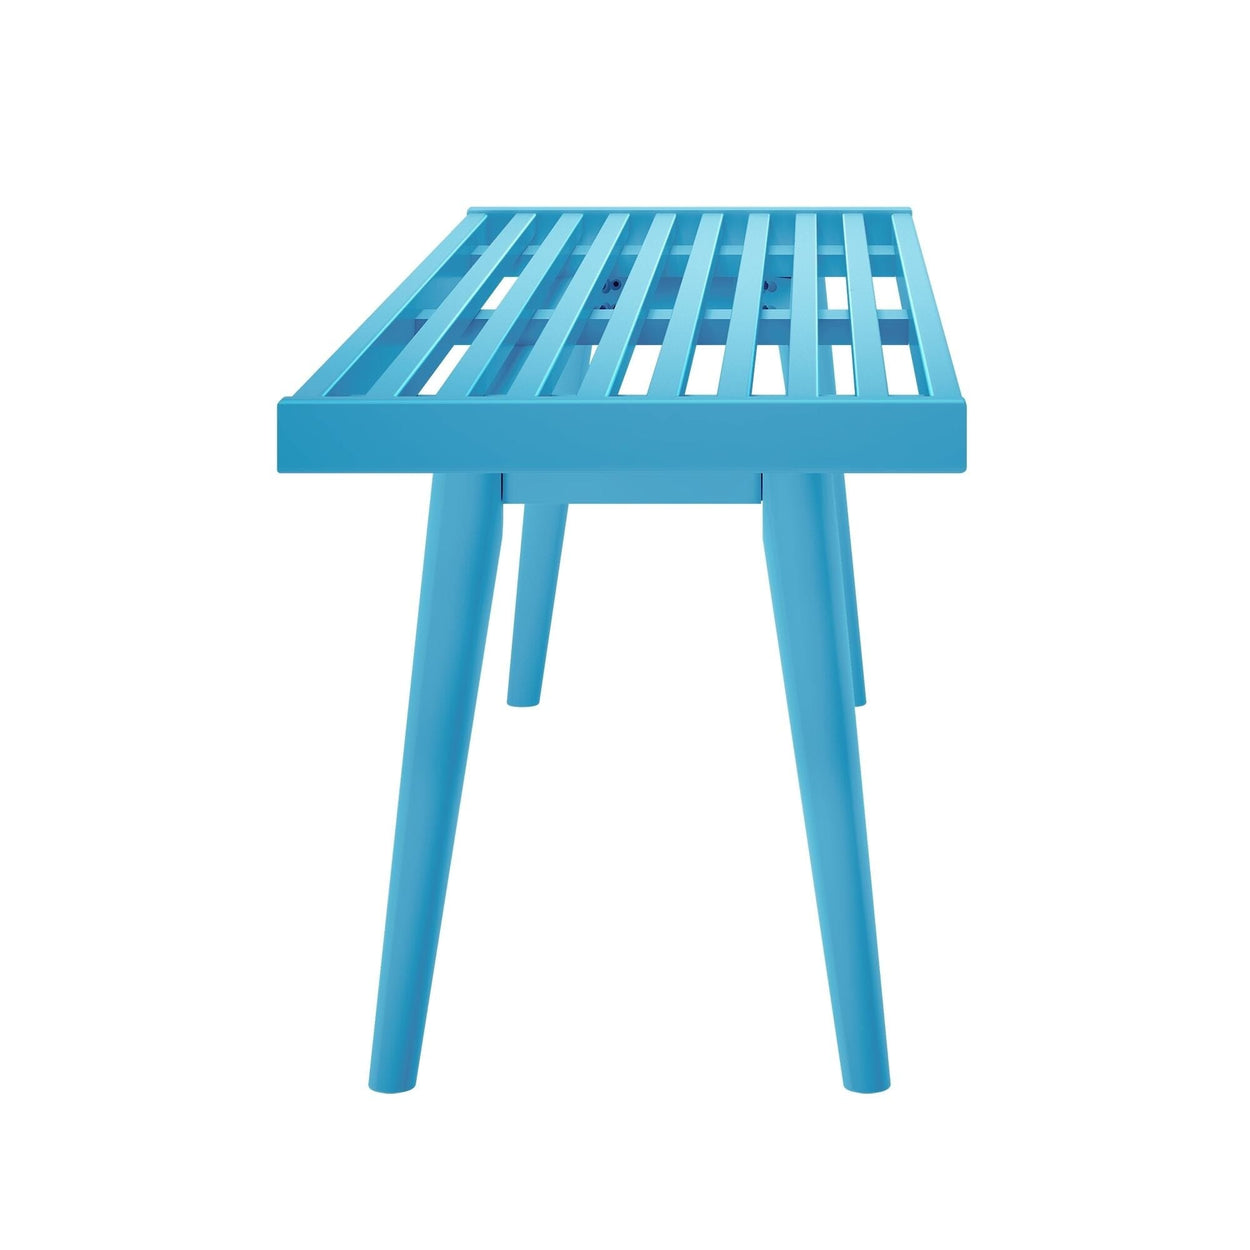 184302-105 : Accessories Mid-Century Modern Full-Size Bench, Teal